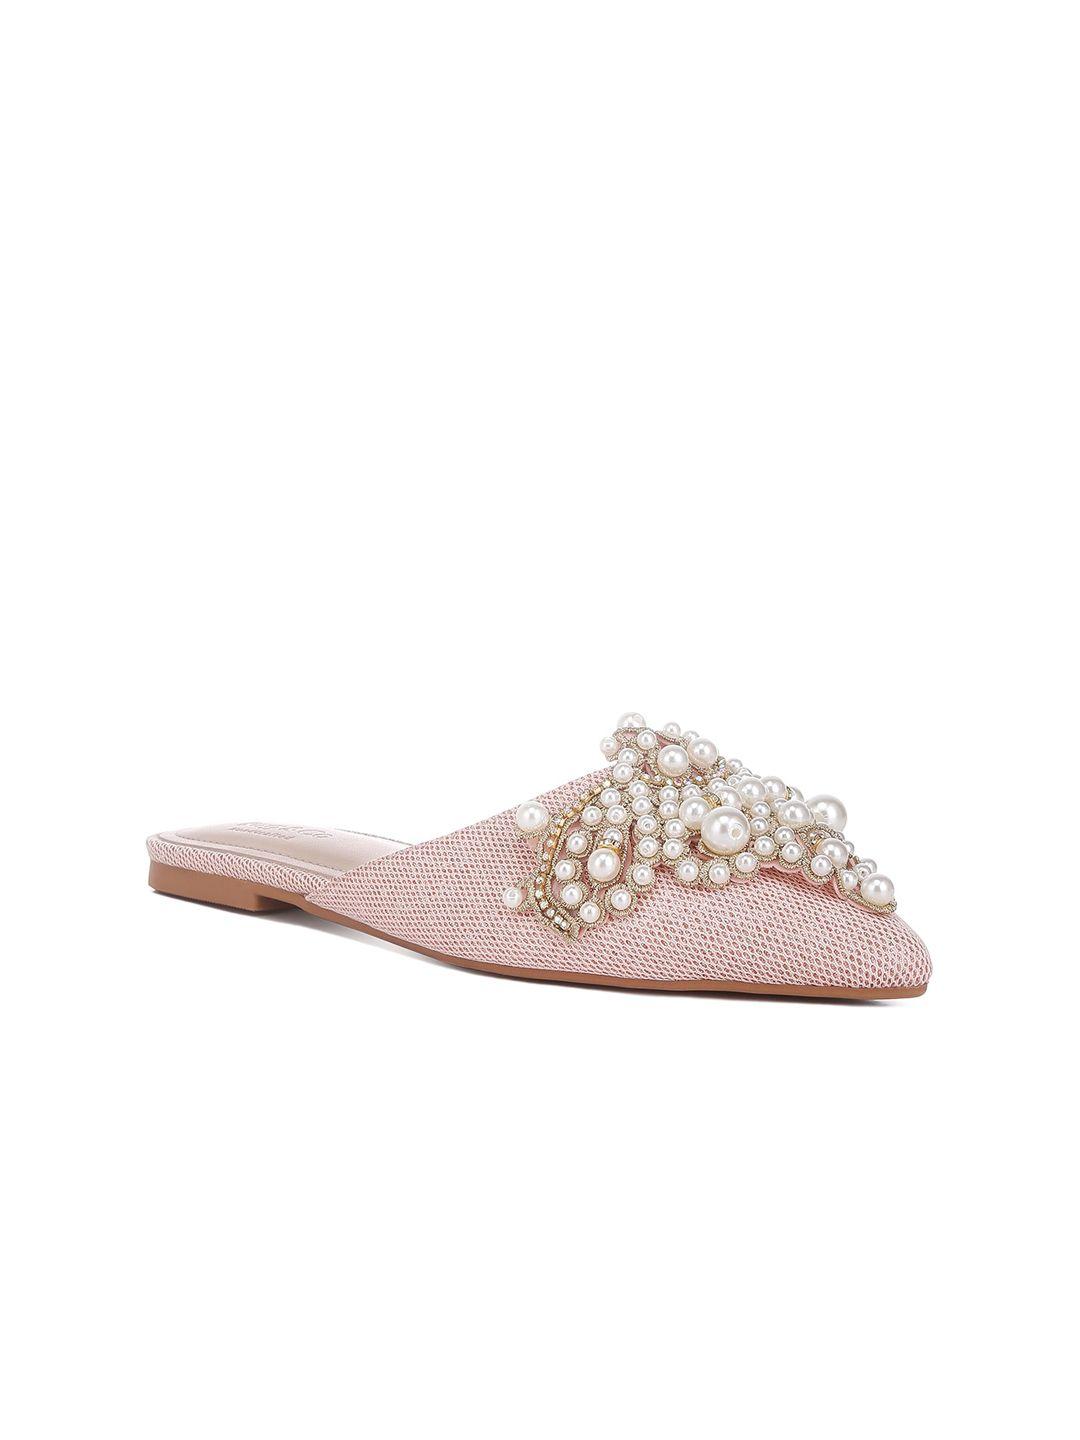 RAG & CO Embellished Pointed Toe Fabric Party Mules